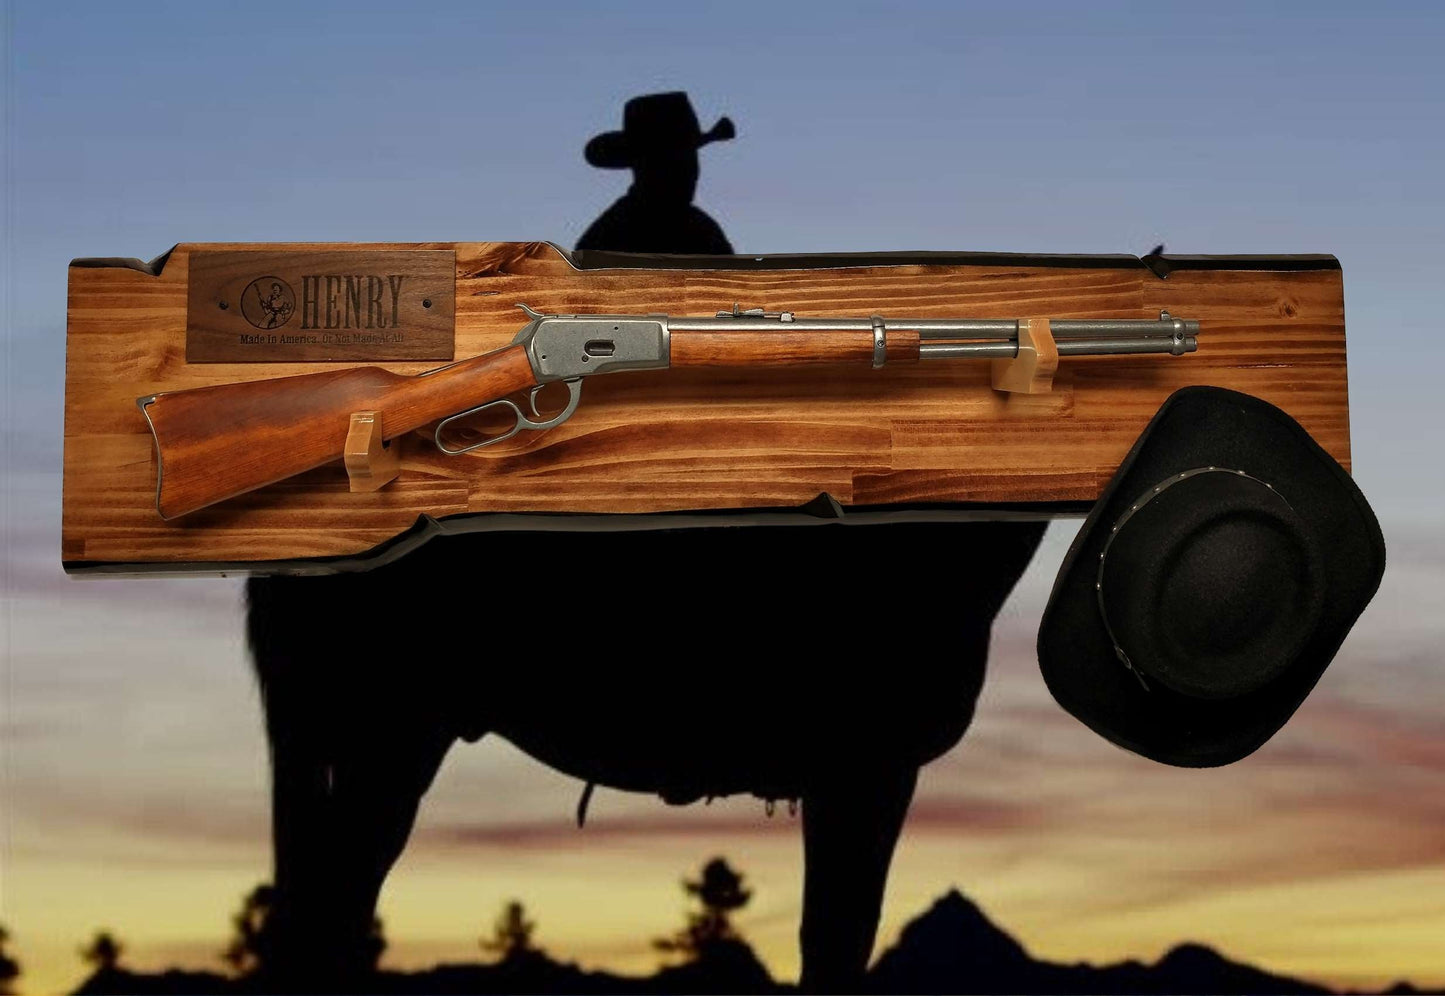 Walker Wood Gifts sword display Lever Action Rustic Henry Gun Rack Display Rifle Faux Live Edge Knotty Pine Cabin Décor Collectors Gift